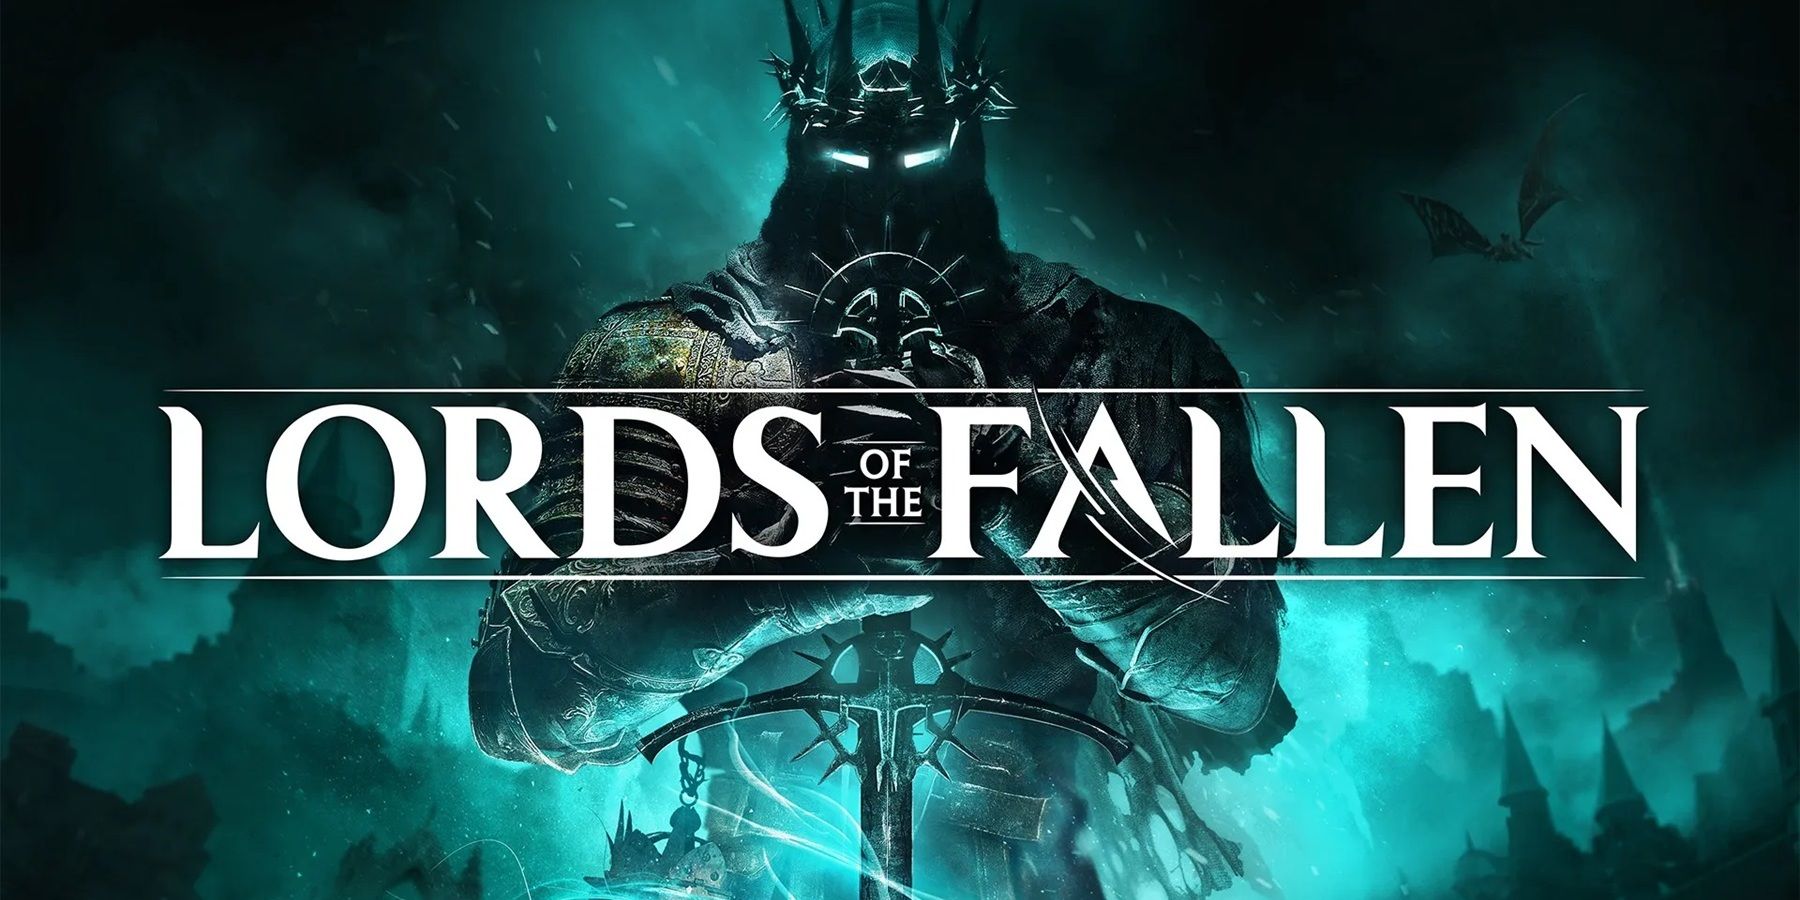 Lords of the Fallen – Patch v.1.1.203